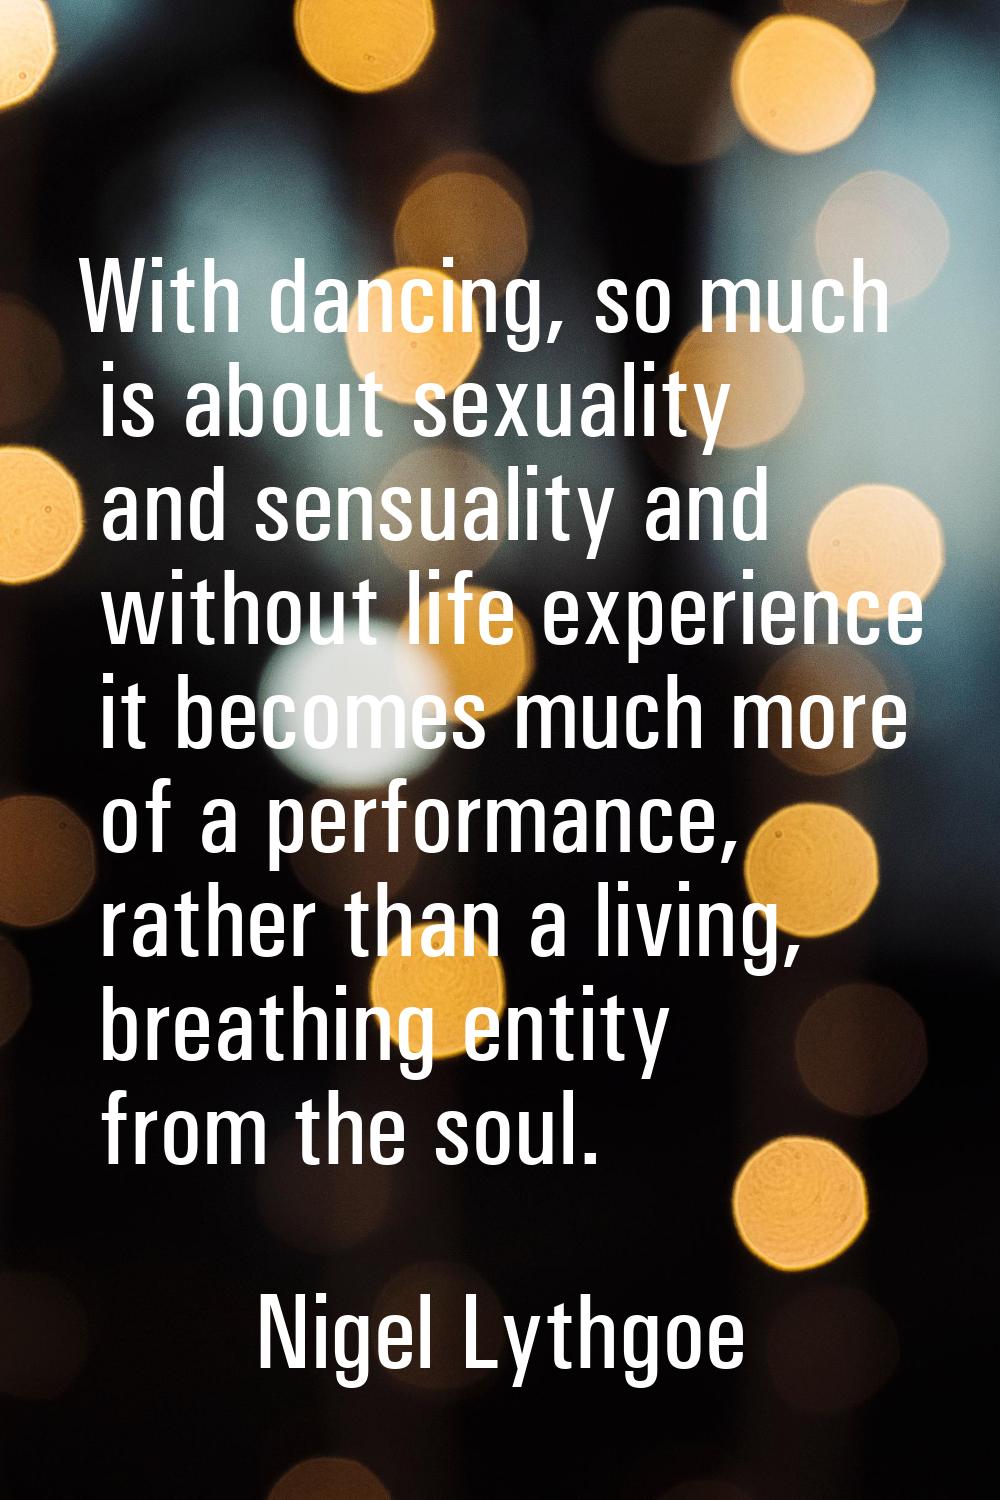 With dancing, so much is about sexuality and sensuality and without life experience it becomes much